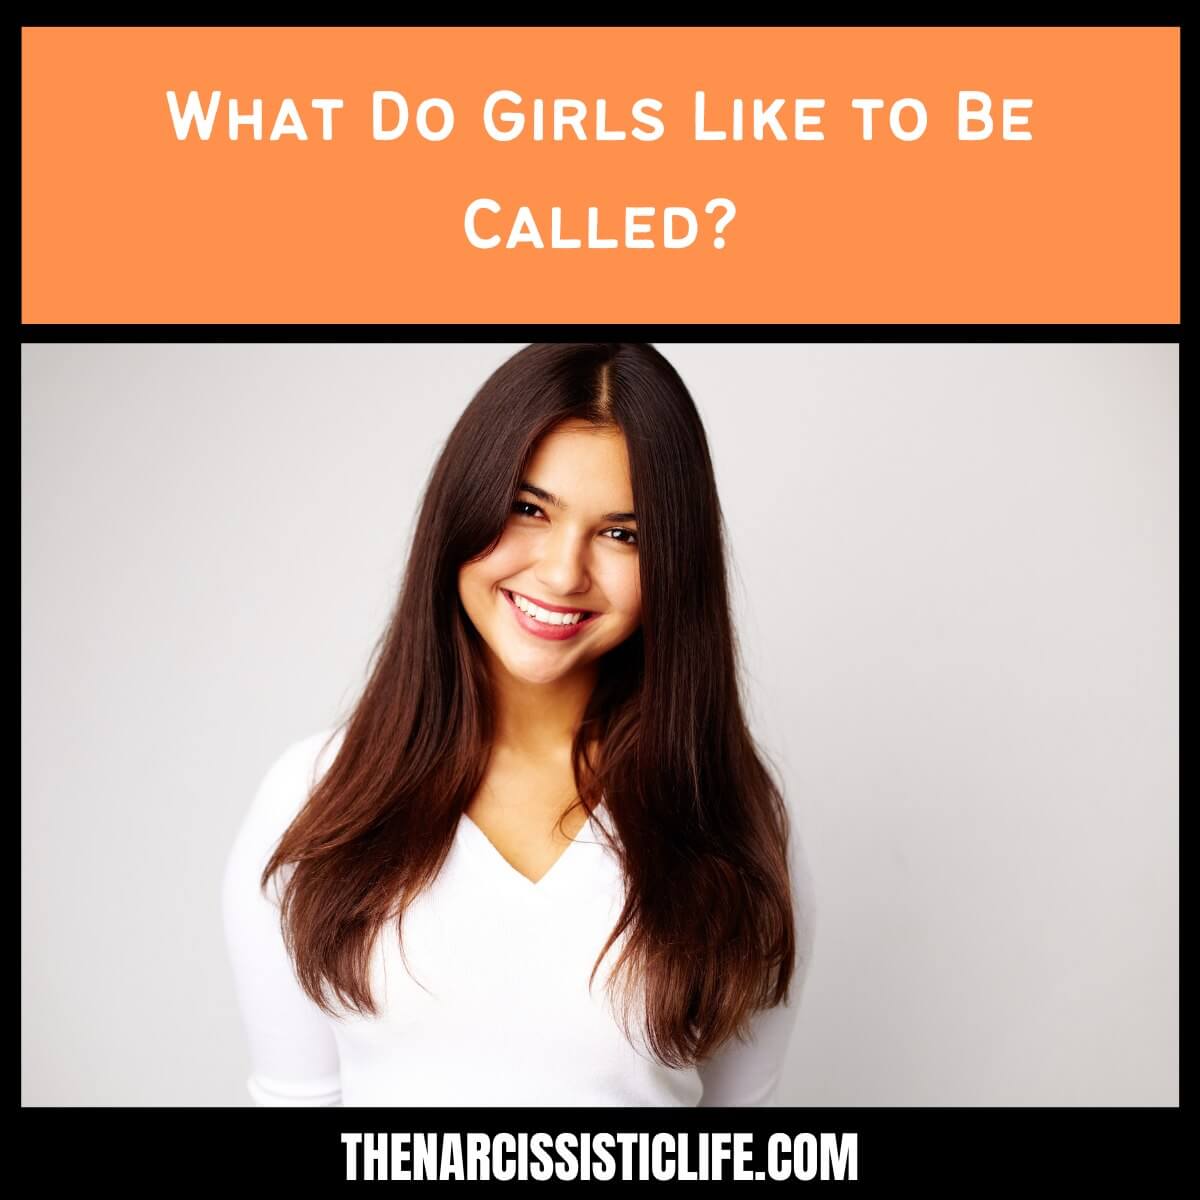 What Do Girls Like to Be Called